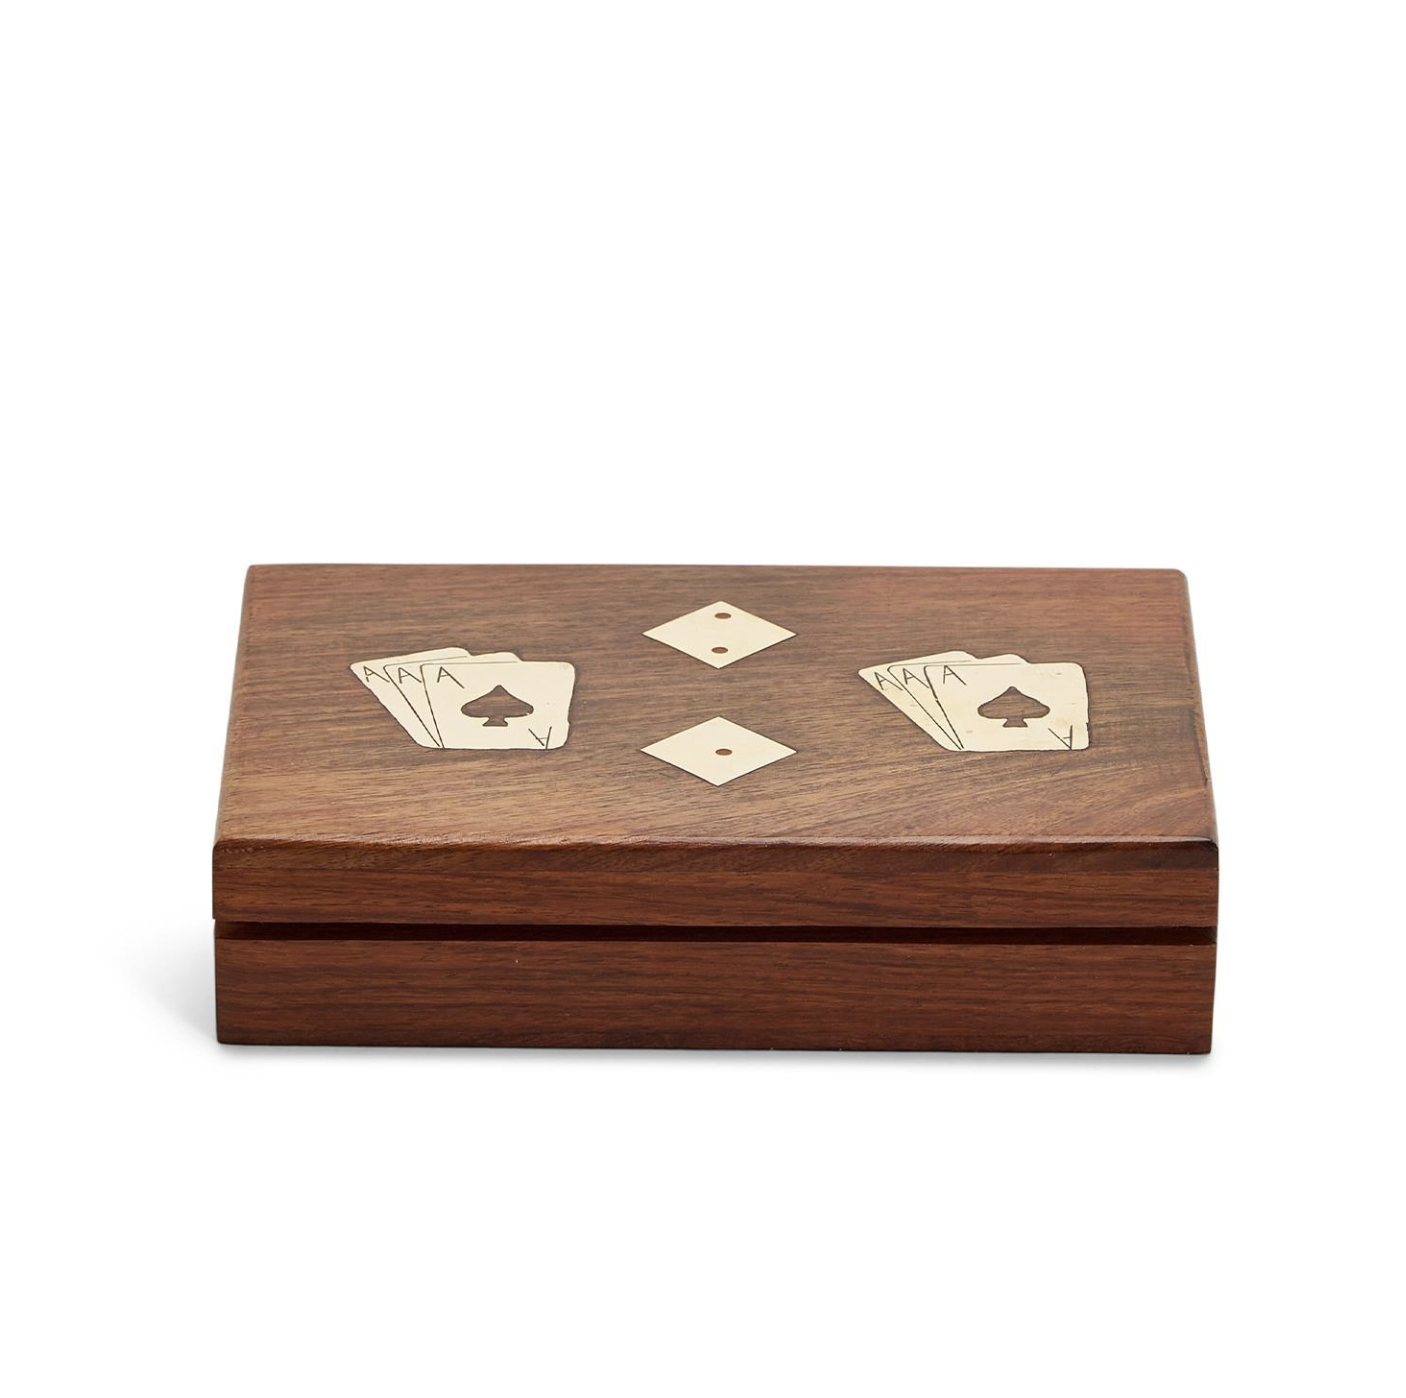 TWO'S COMPANY WOOD CRAFTED PLAYING CARD/DICE GAME SET